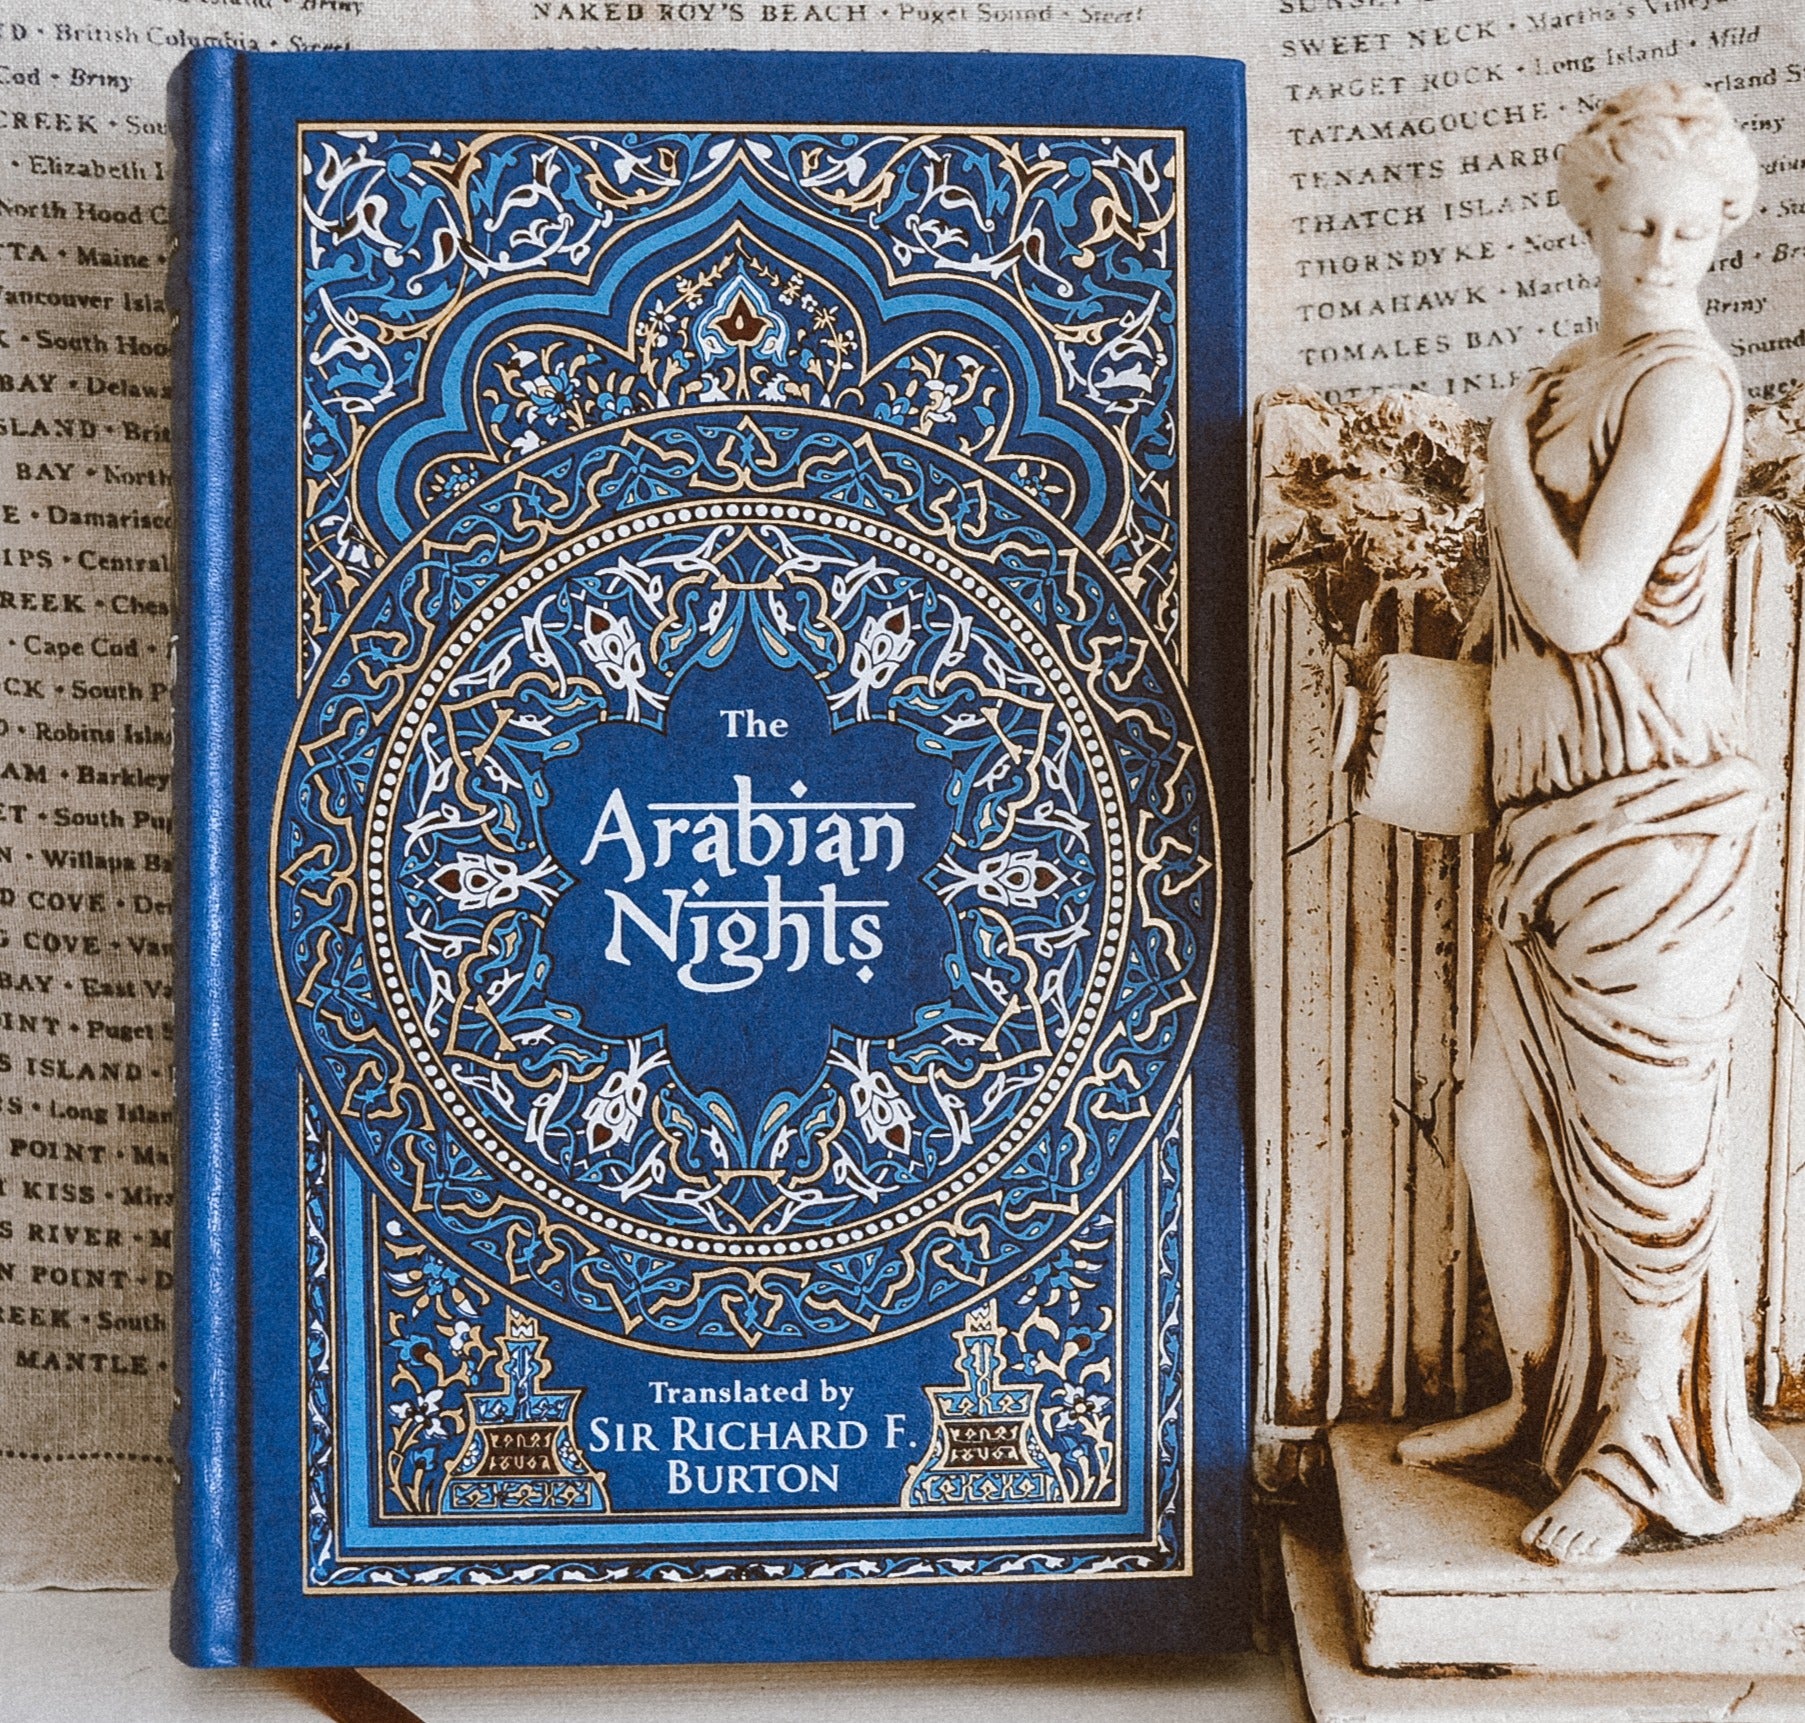 The Arabian Nights Deluxe Collector Edition